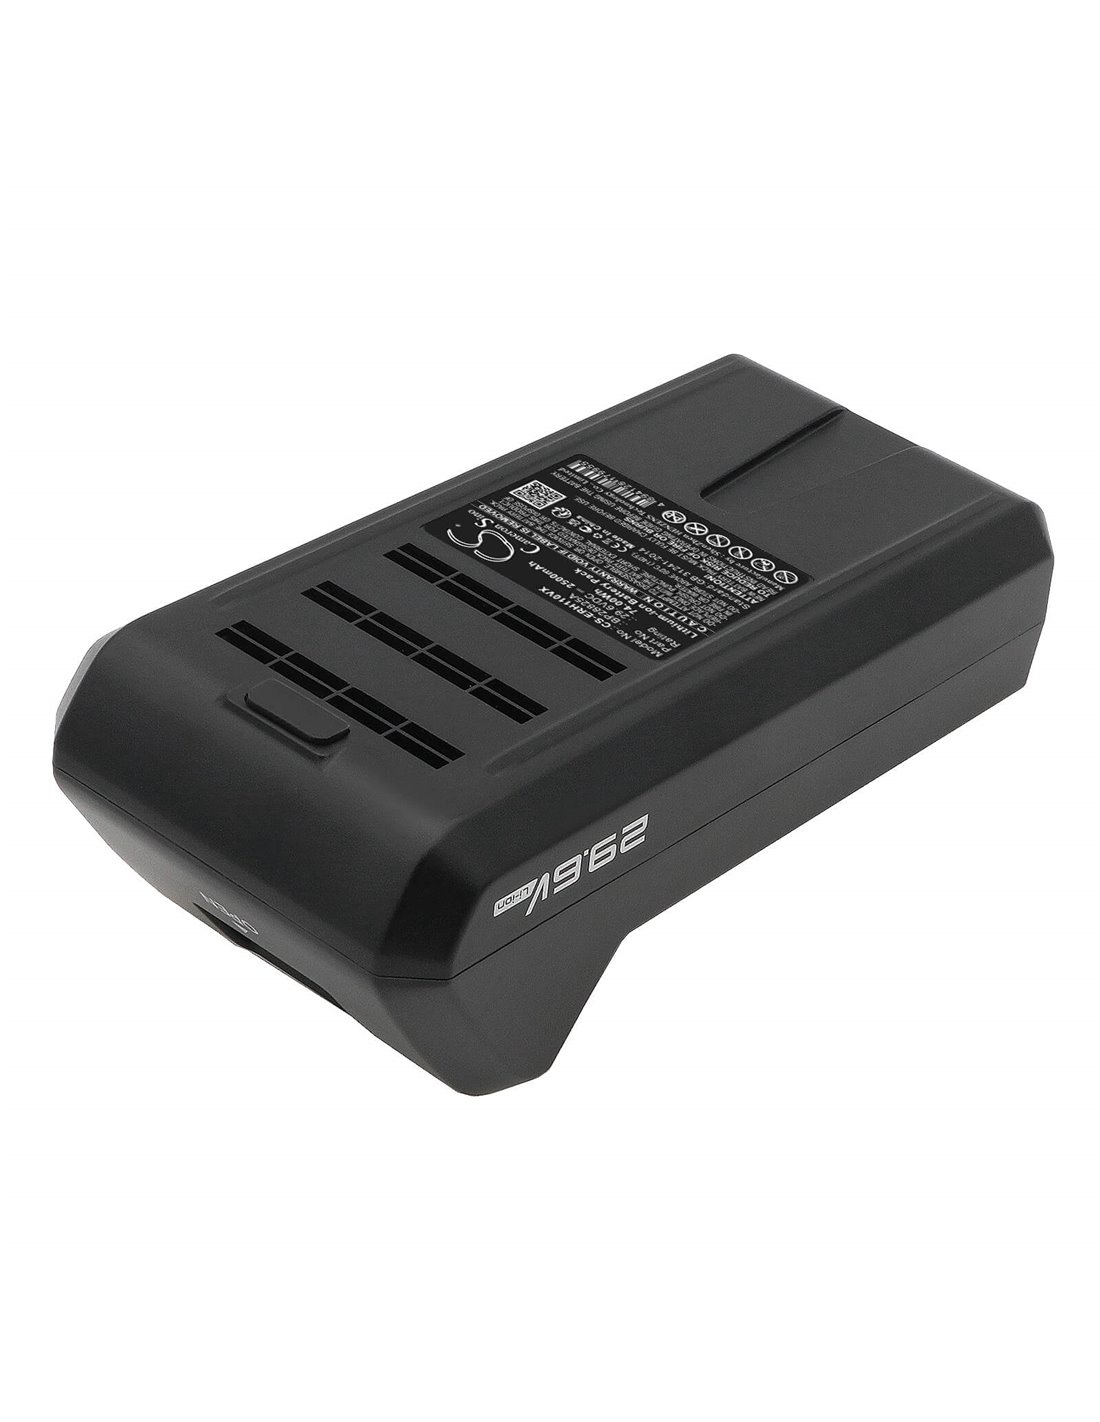 TruePower 18 Volt Lithium Ion Replacement Battery for Cordless